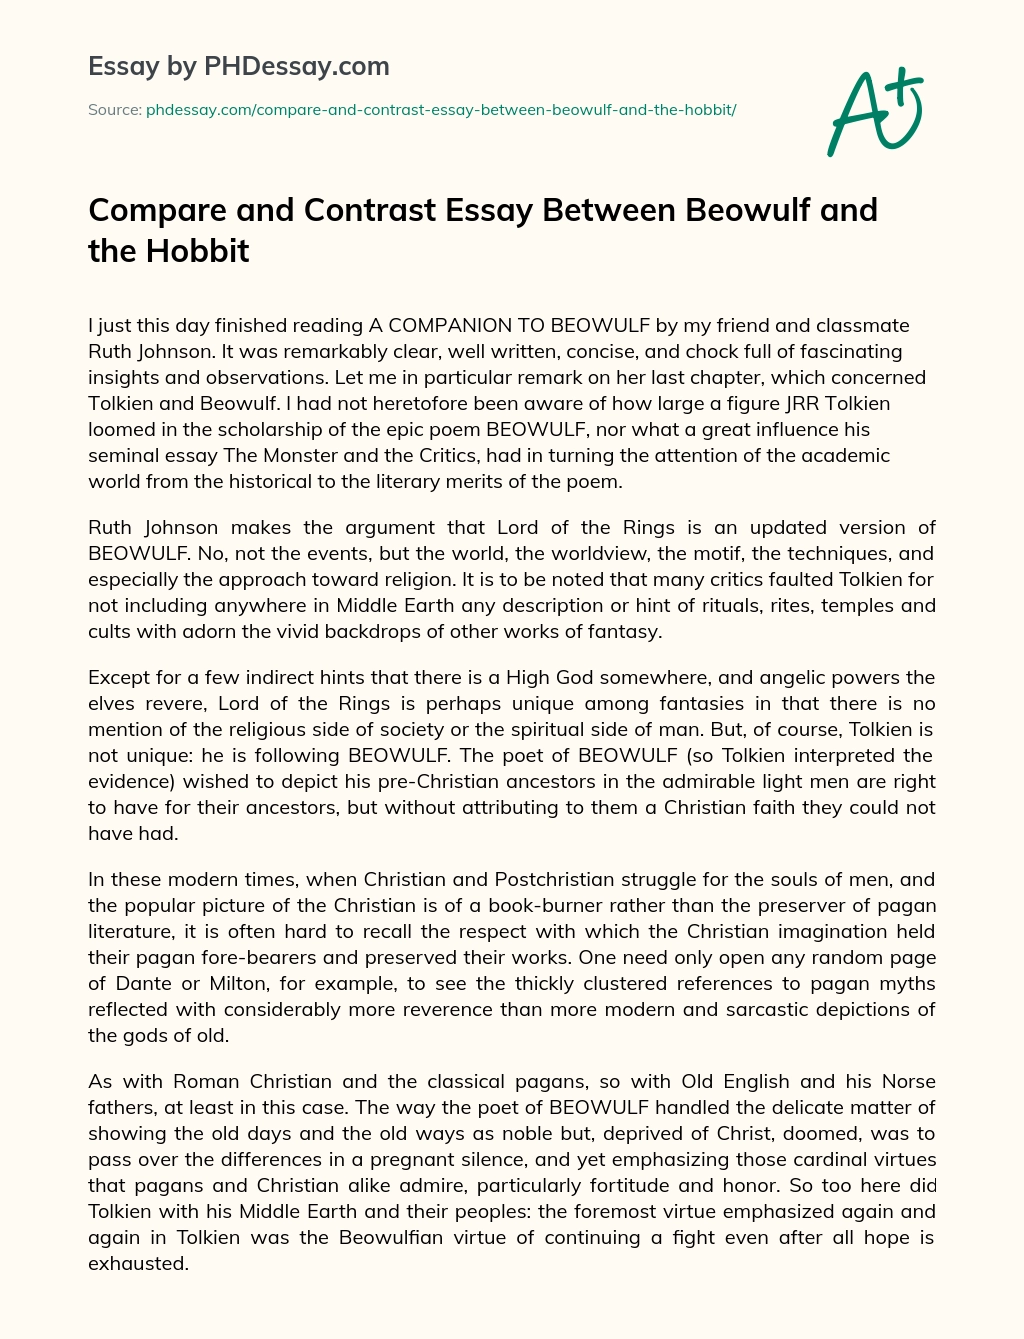 Compare and Contrast Essay Between Beowulf and the Hobbit essay